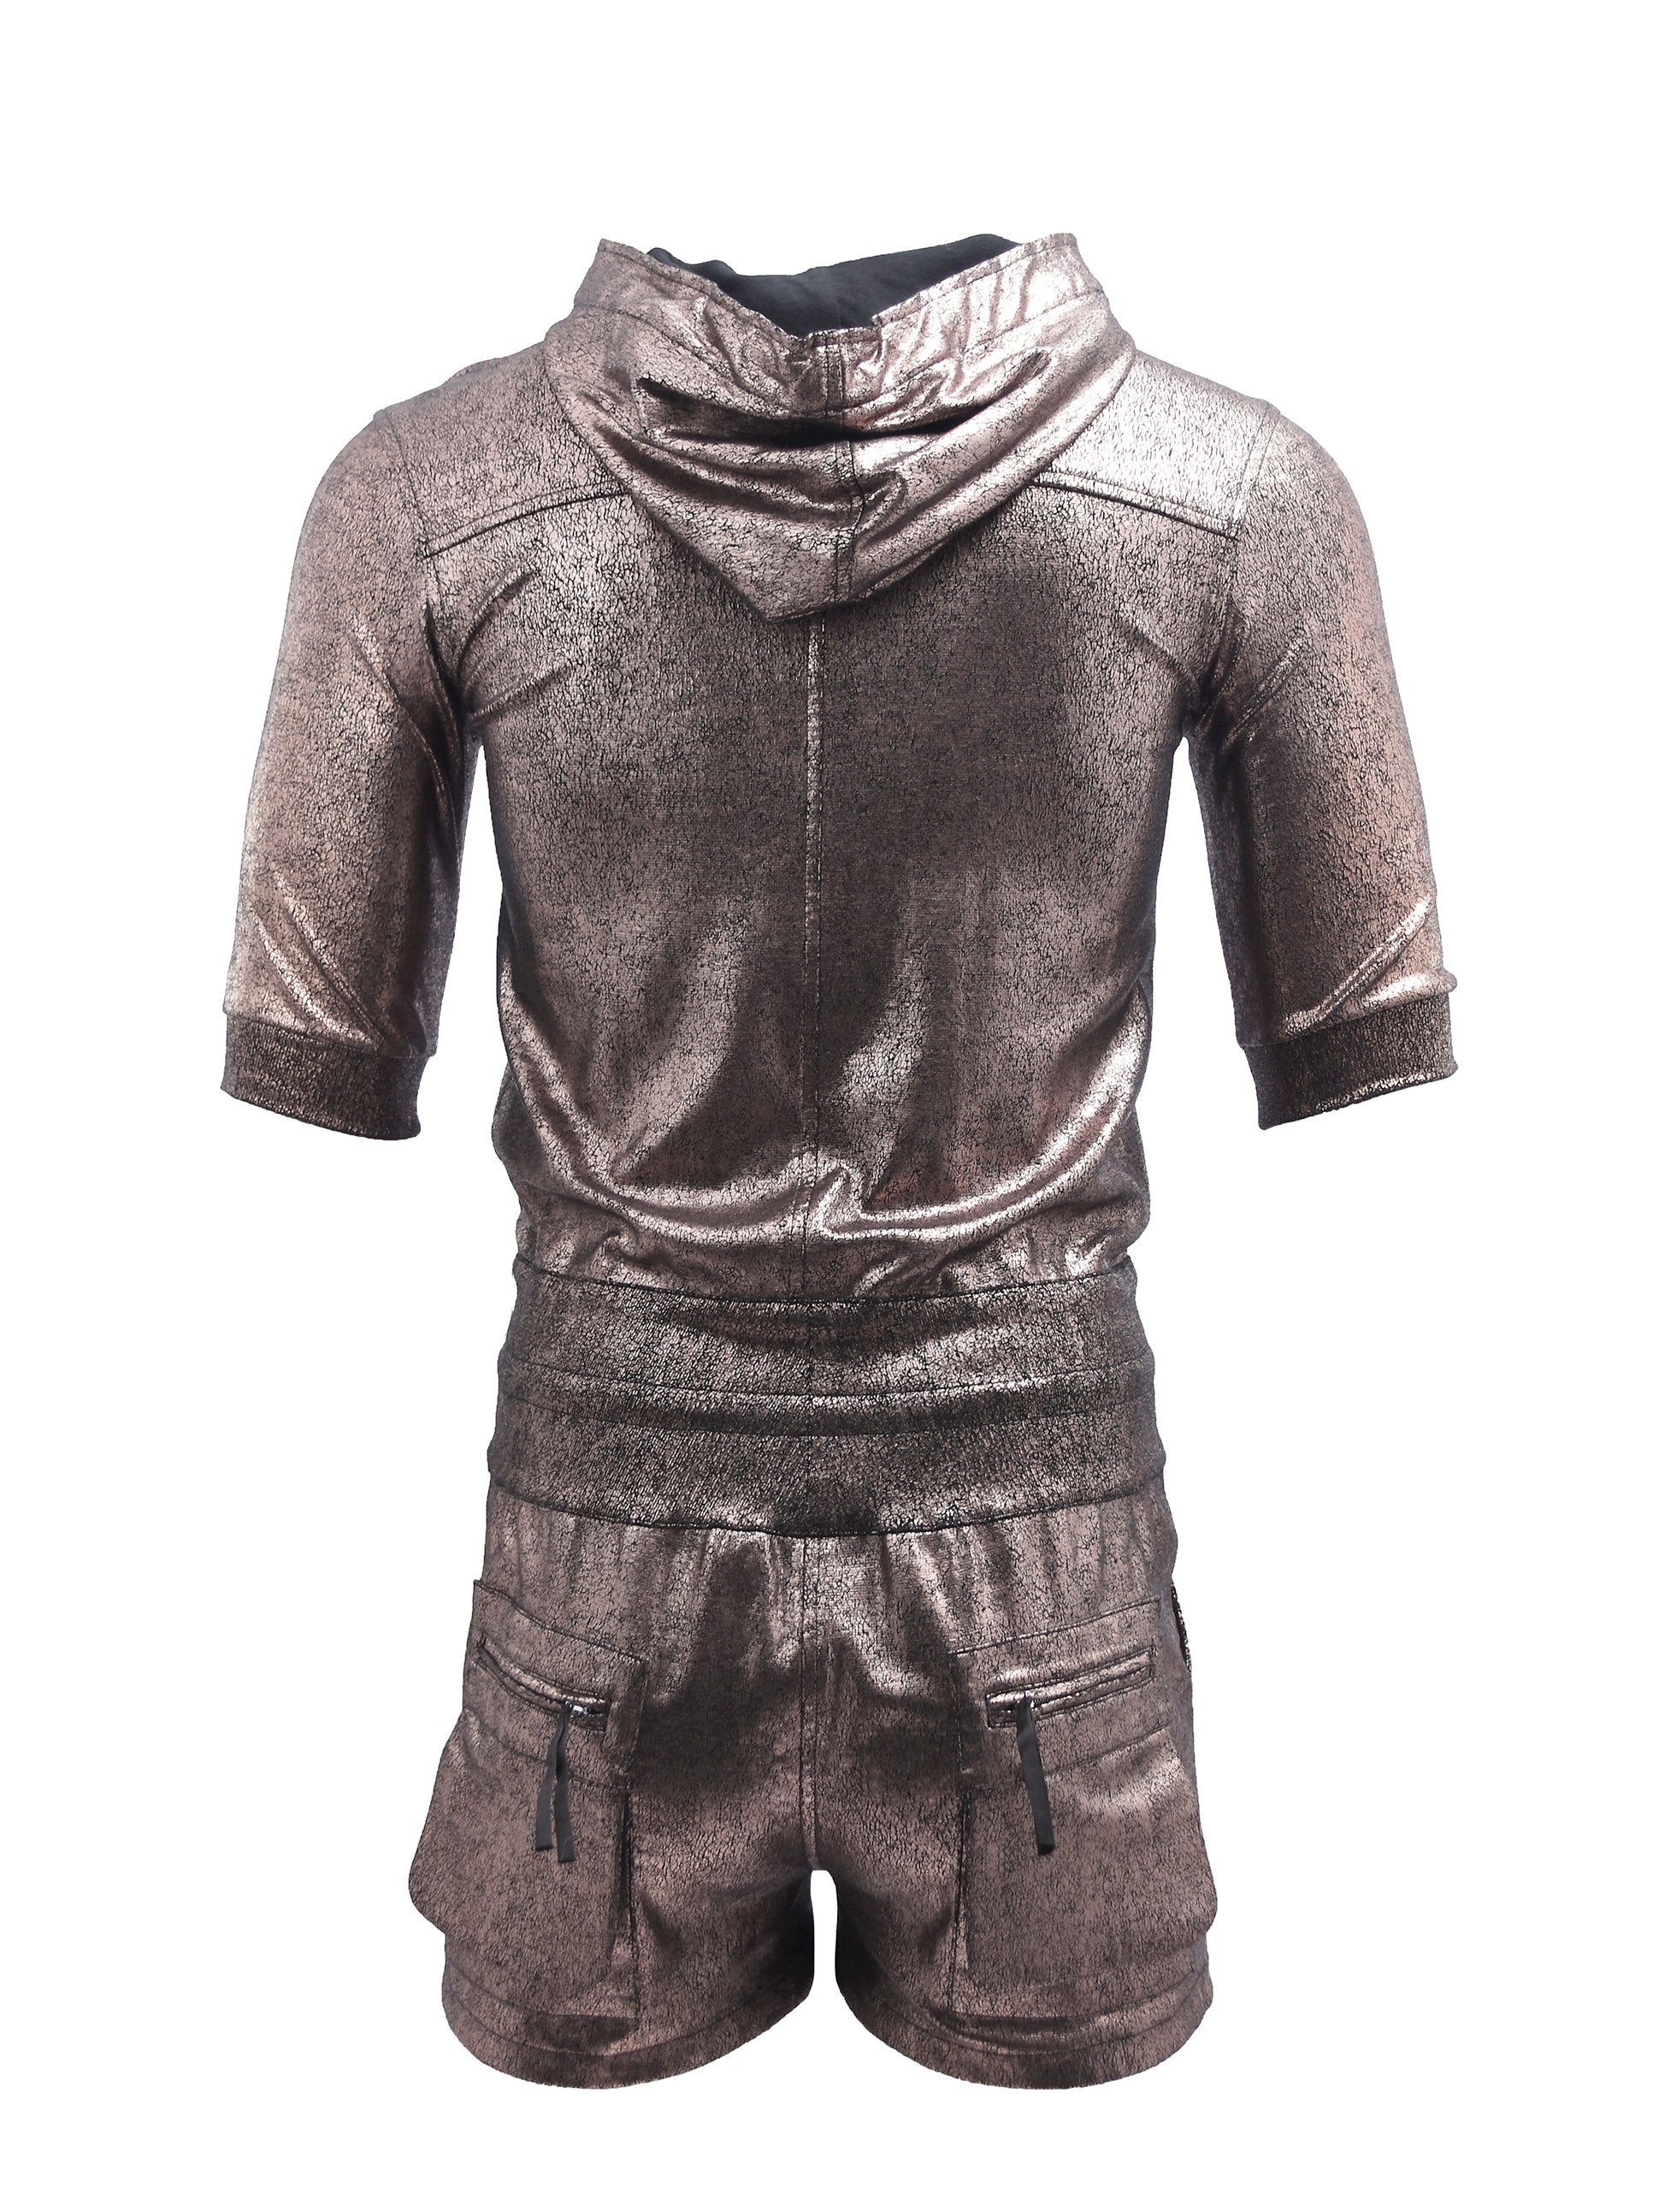 BRONZE FOILED HOODED PLAYSUIT